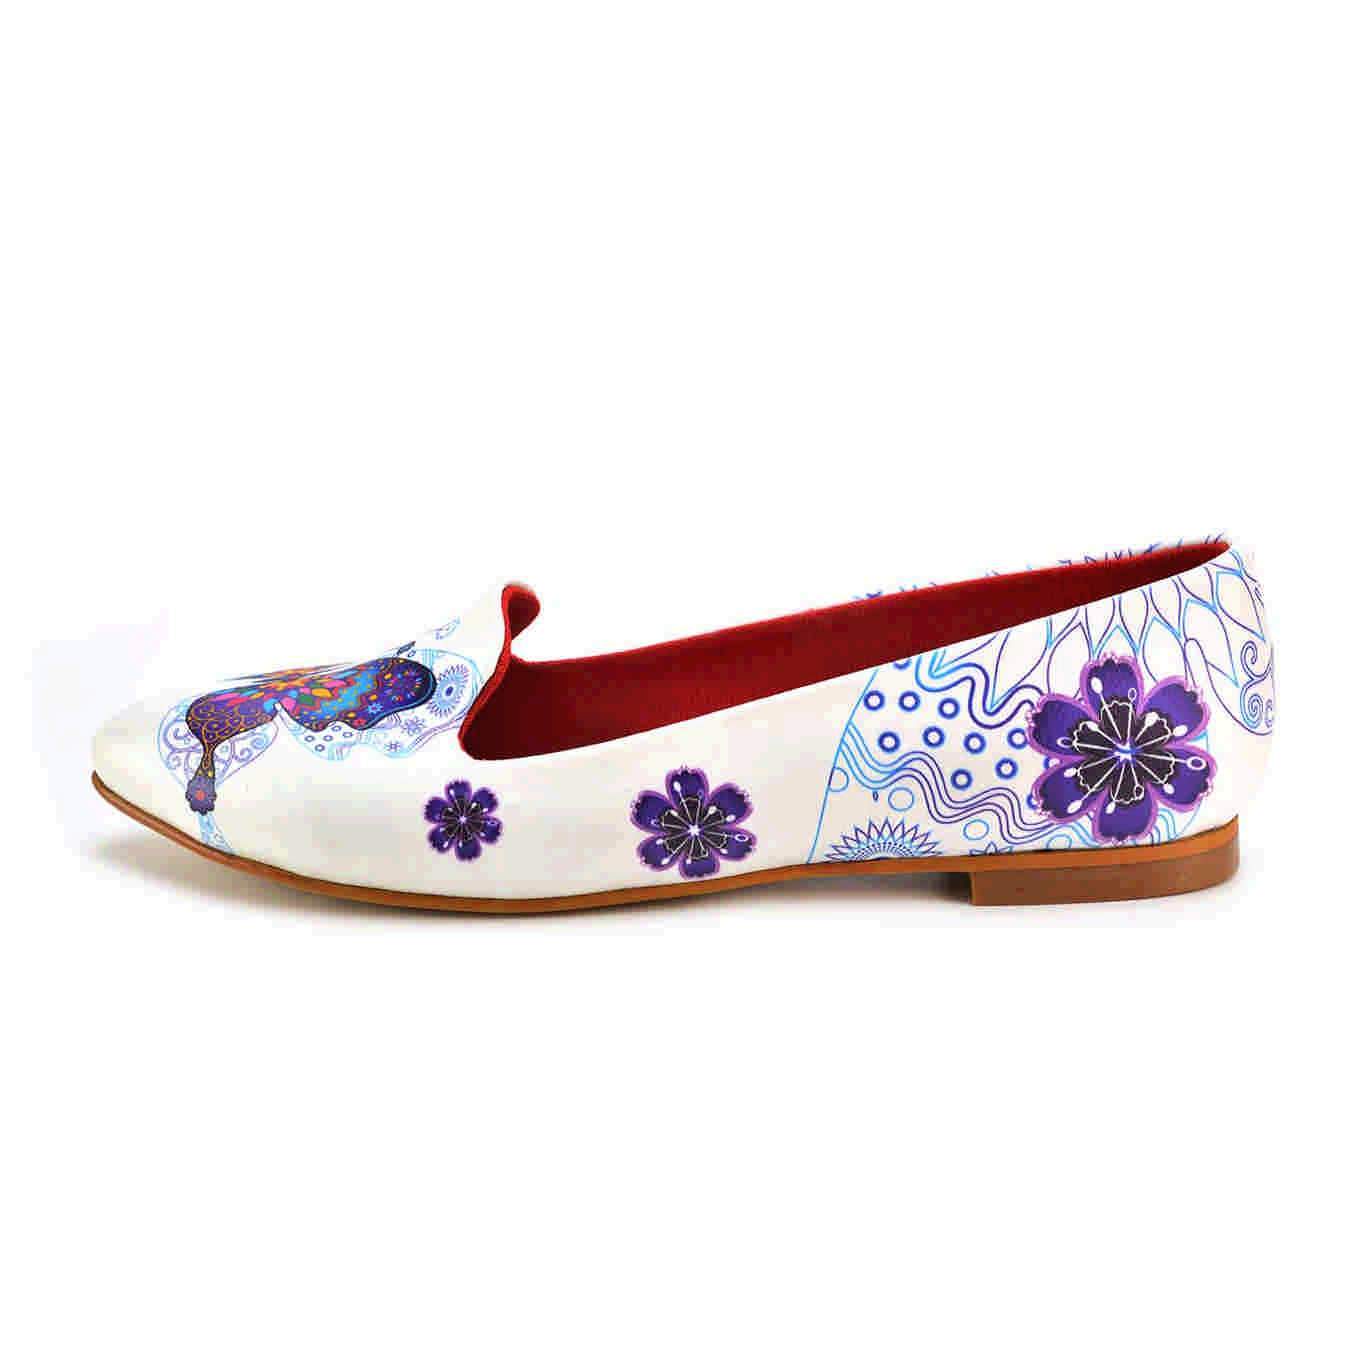 Ballerinas Shoes NBL231, Goby, NFS Ballerinas Shoes 